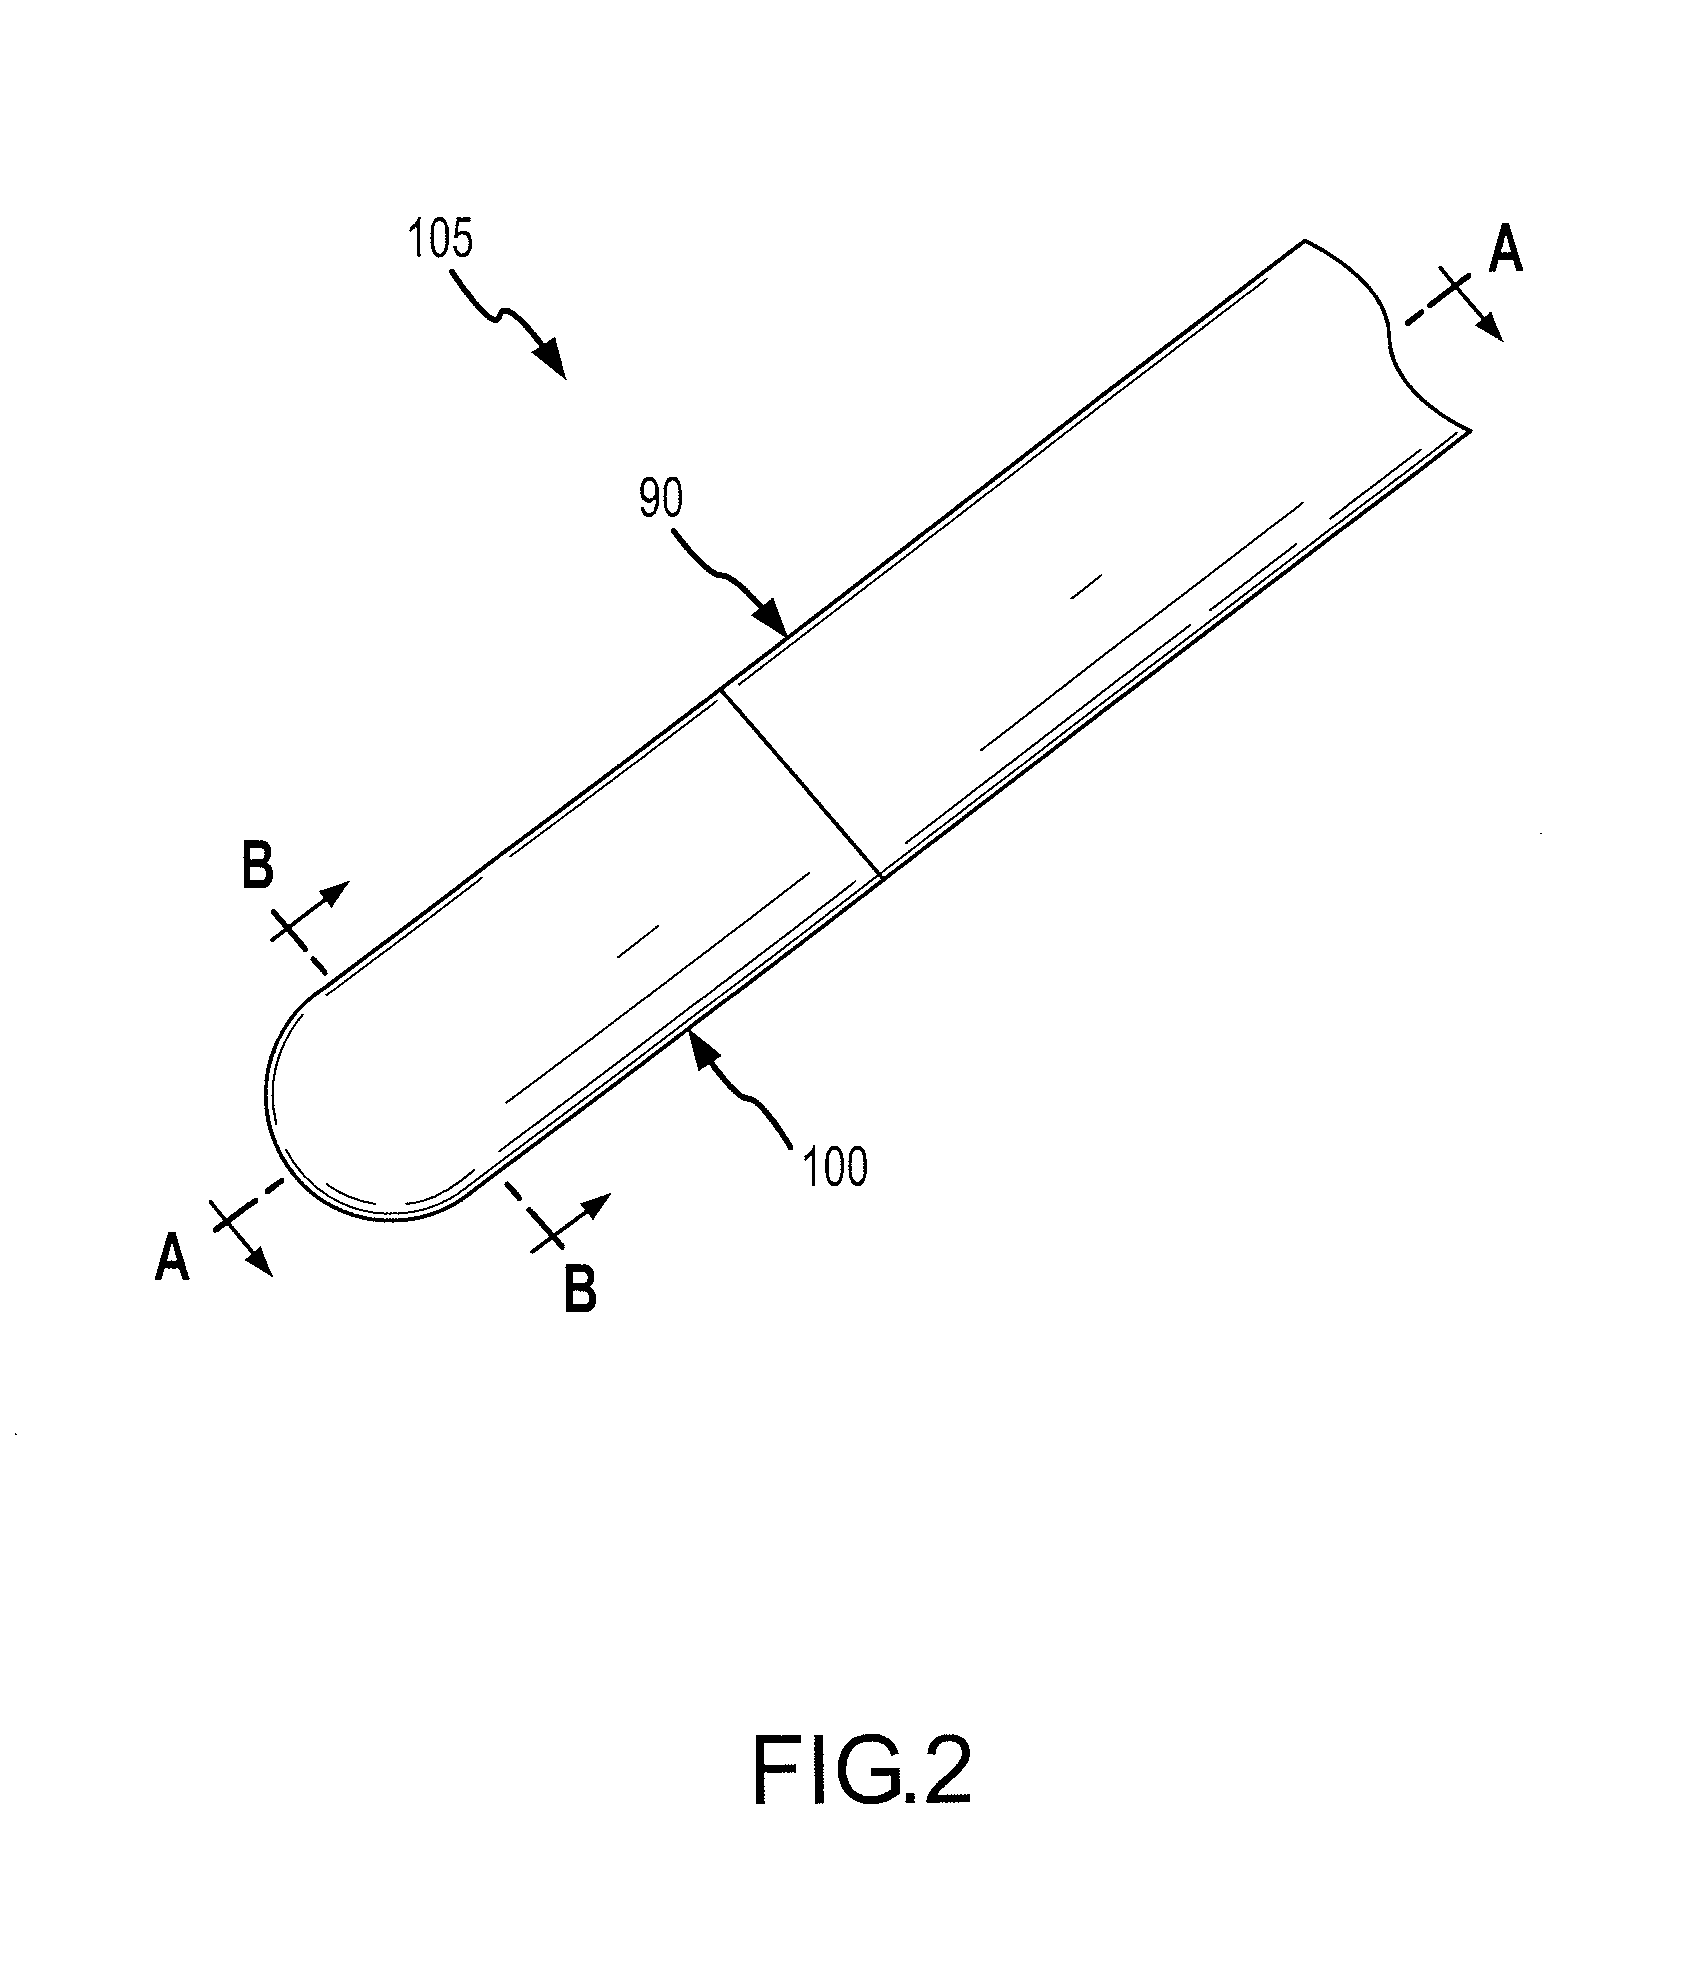 Ablation electrodes with capacitive sensors for resolving magnitude and direction of forces imparted to a distal portion of a cardiac catheter